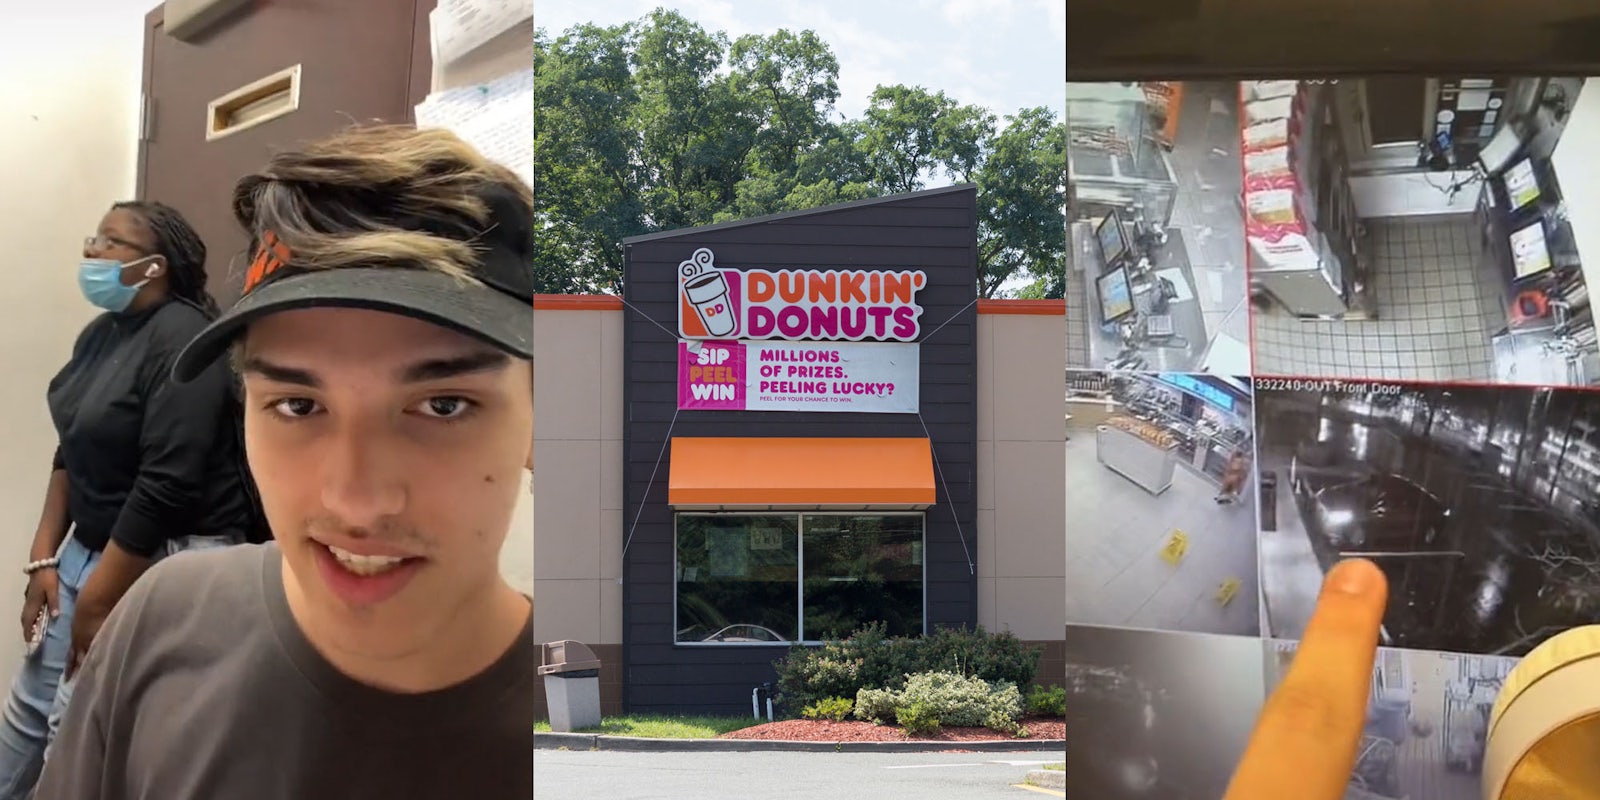 male and female dunkin donuts workers at work (l) Dunkin Donuts building (c) Security camera footage with finger pointing to car (r)